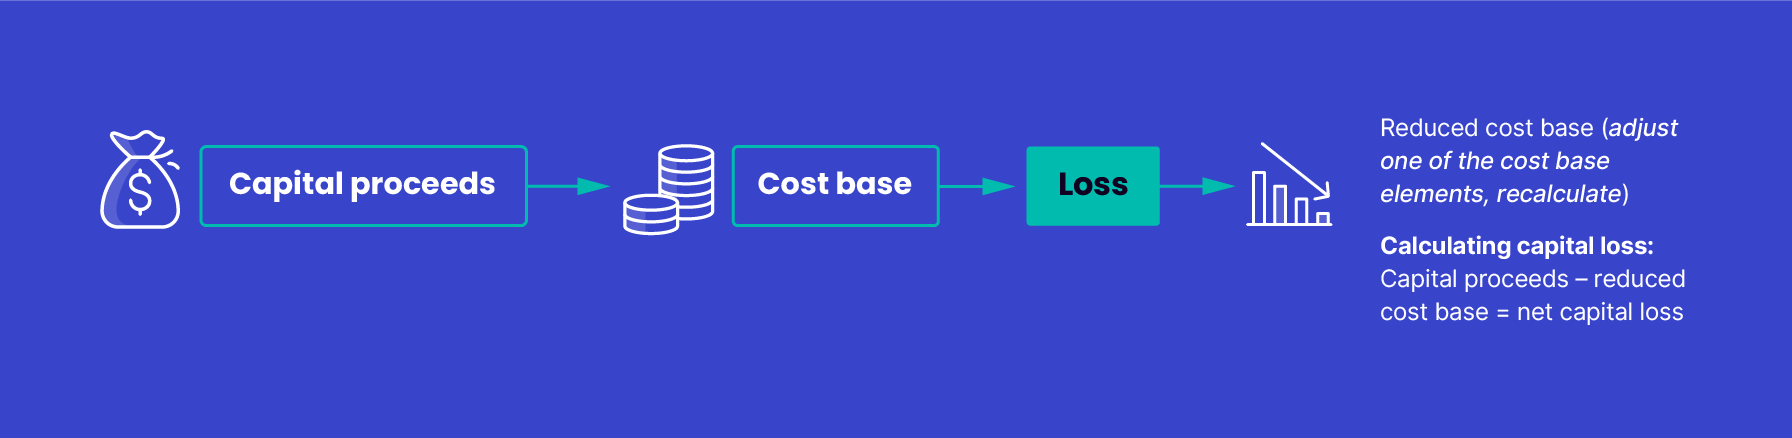 Diagram representing how and when the reduced cost based is used to calculate a capital loss. The diagram shows that after calculating your capital proceeds and cost base, if you have a loss, you calculate the reduced cost base. The capital loss is the capital proceeds minus the reduced cost base.